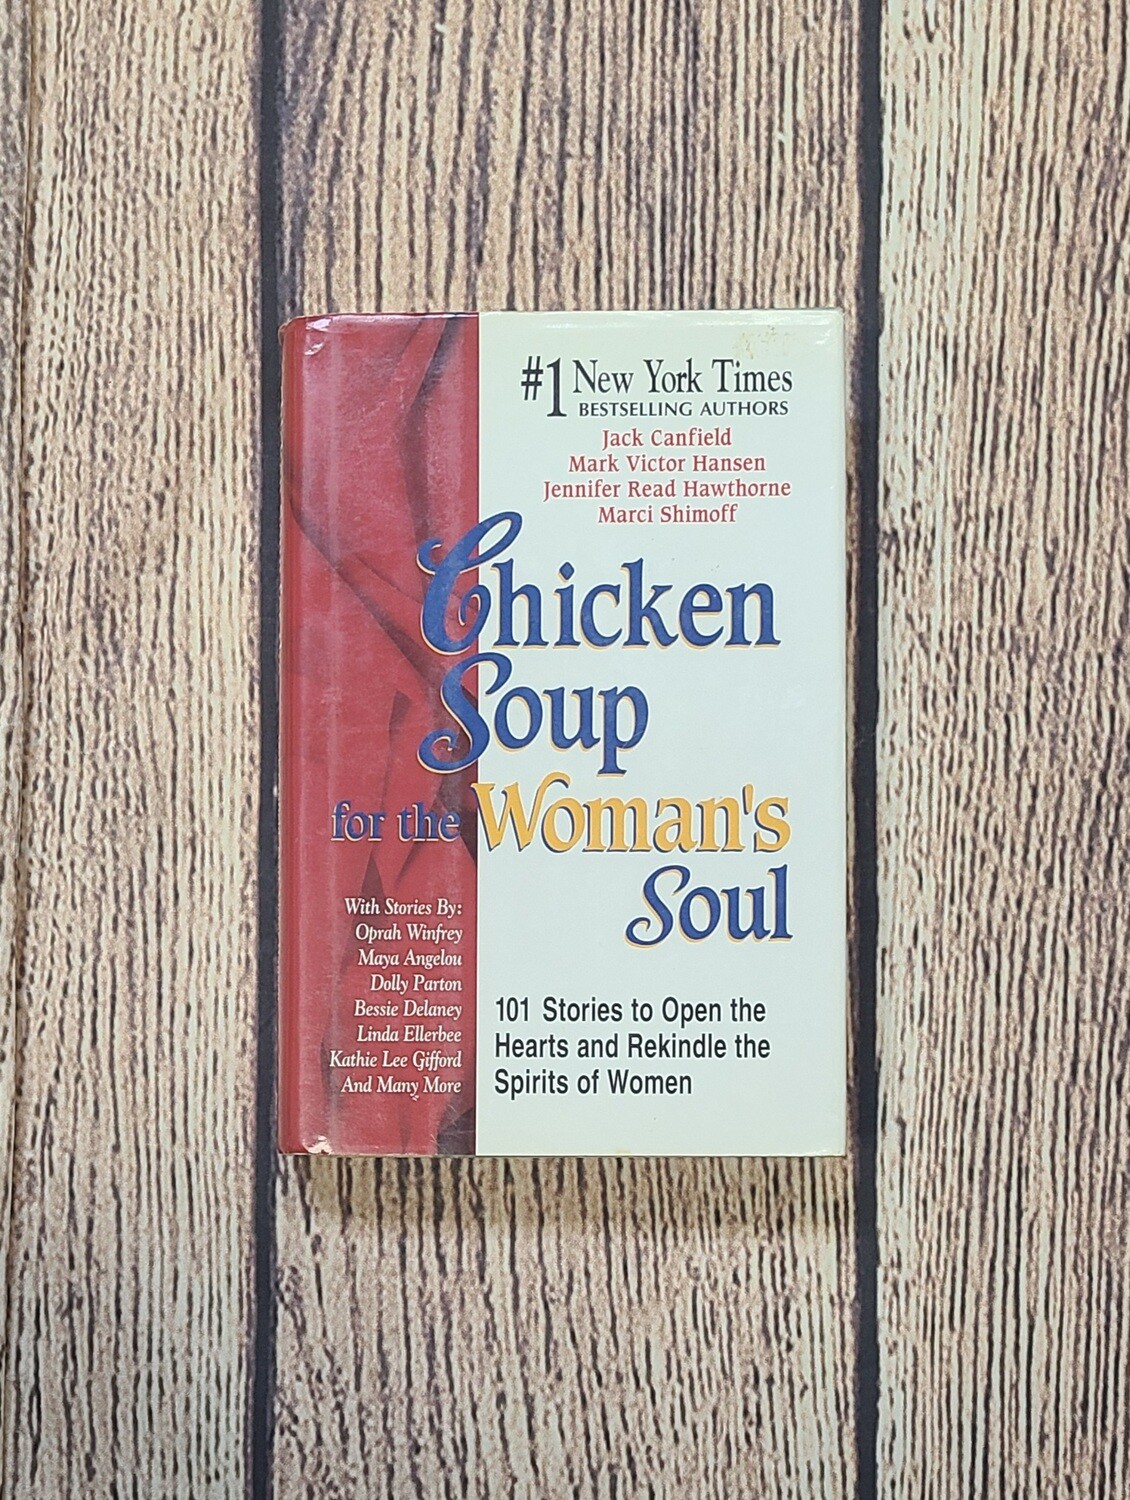 Chicken Soup for the Woman's Soul by Jack Canfield, Mark Victor Hansen, Jennifer Read Hawthorne, and Marci Shimoff - Hardback